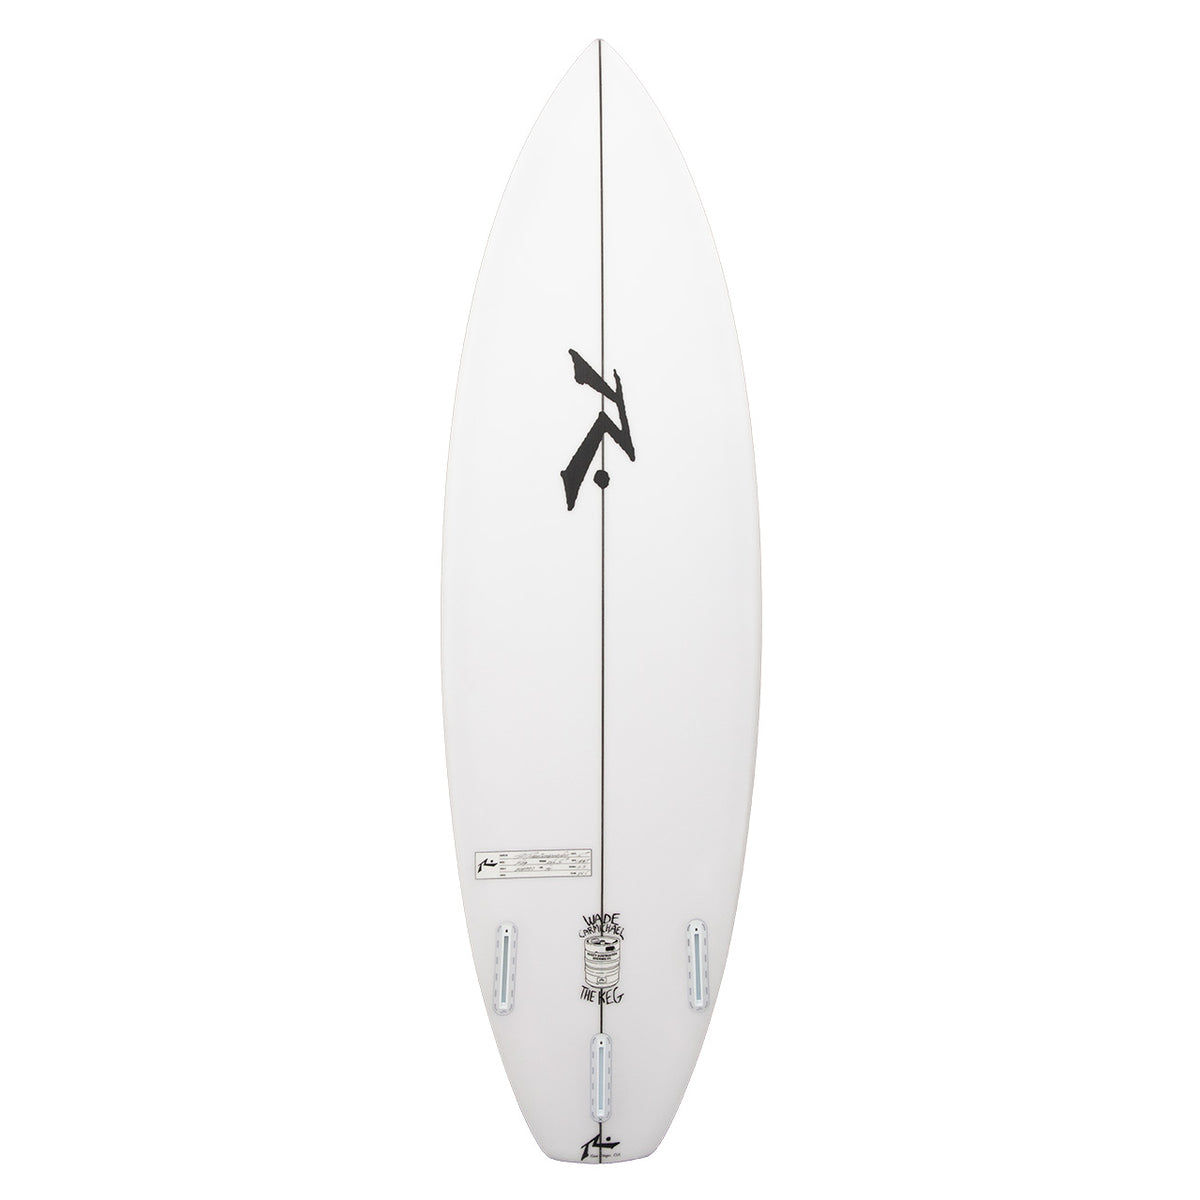 The Keg - High Performance Shortboard - Rusty Surfboards - Bottom View